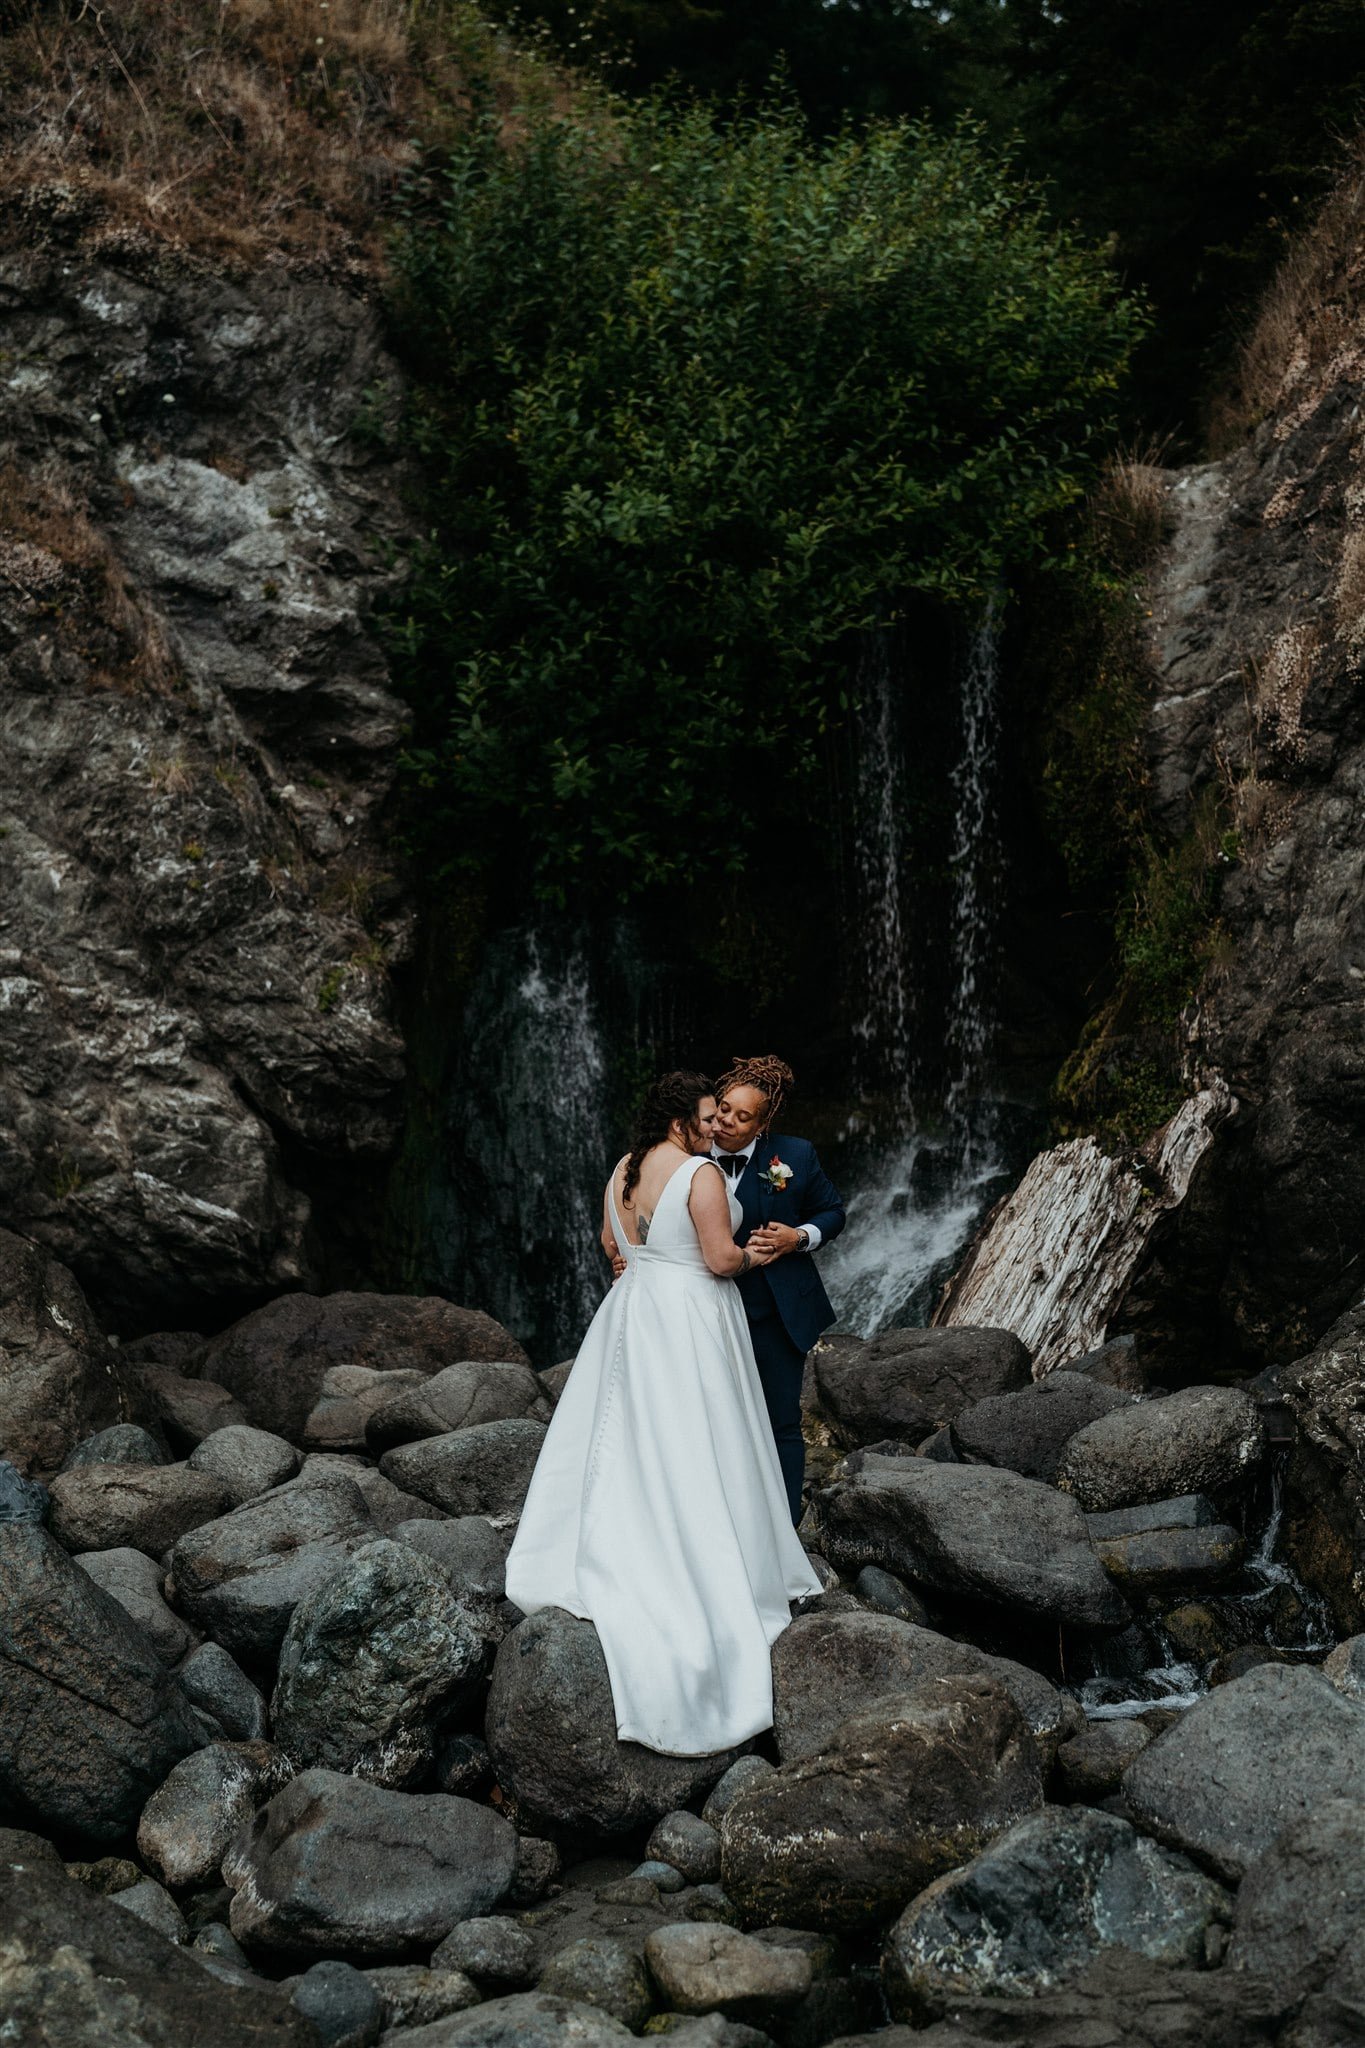 Bridal portraits in front of a waterfall on the beach on the Oregon Coast